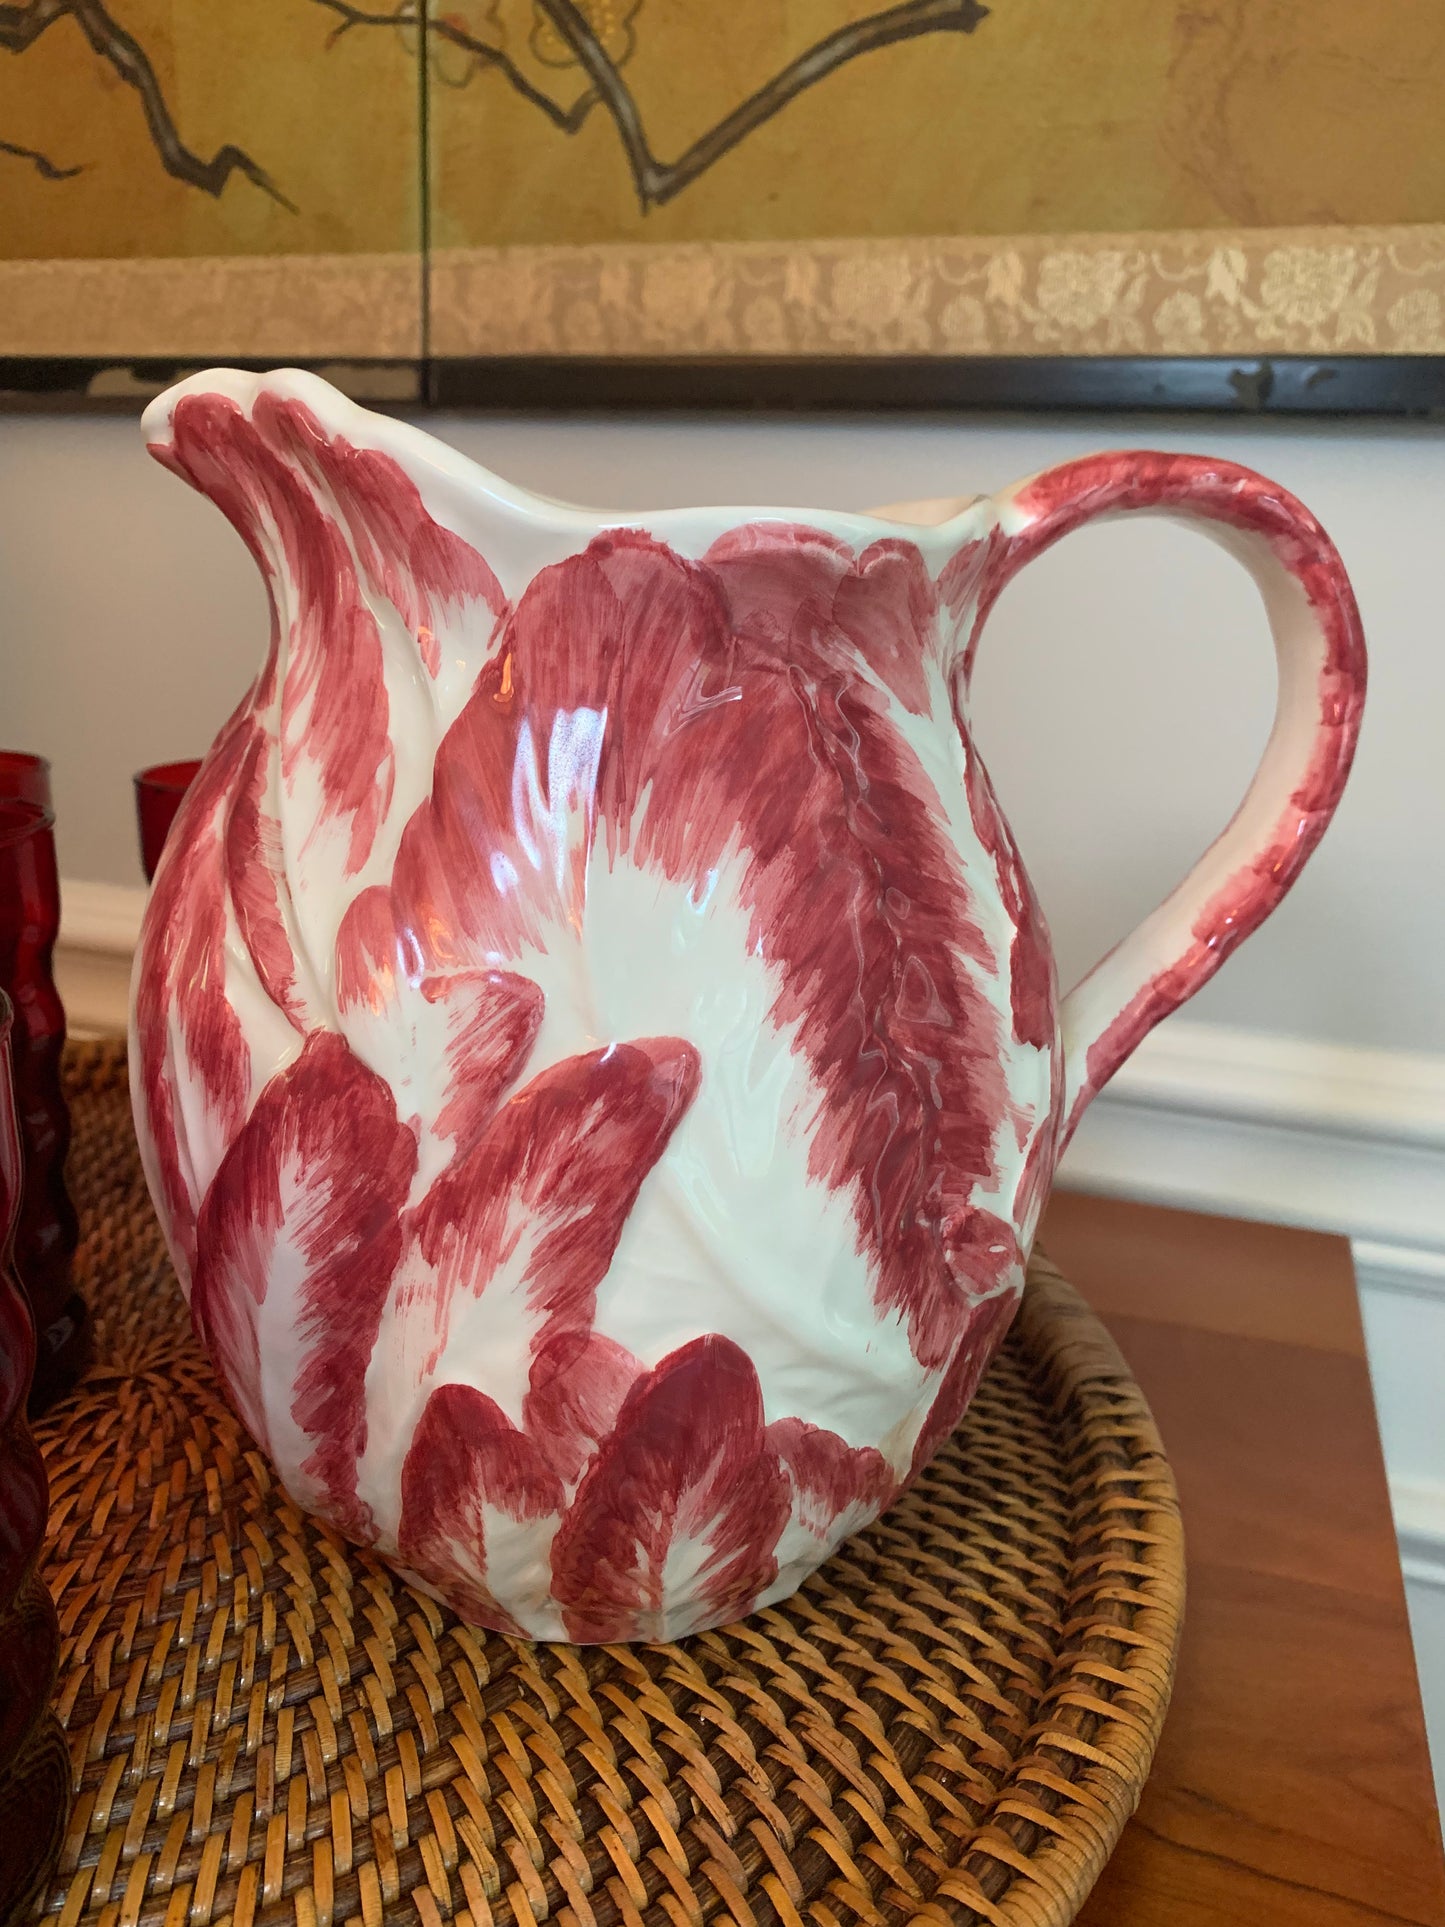 Vintage Sculpted Radicchio Leafed Pitcher (Made in Italy)